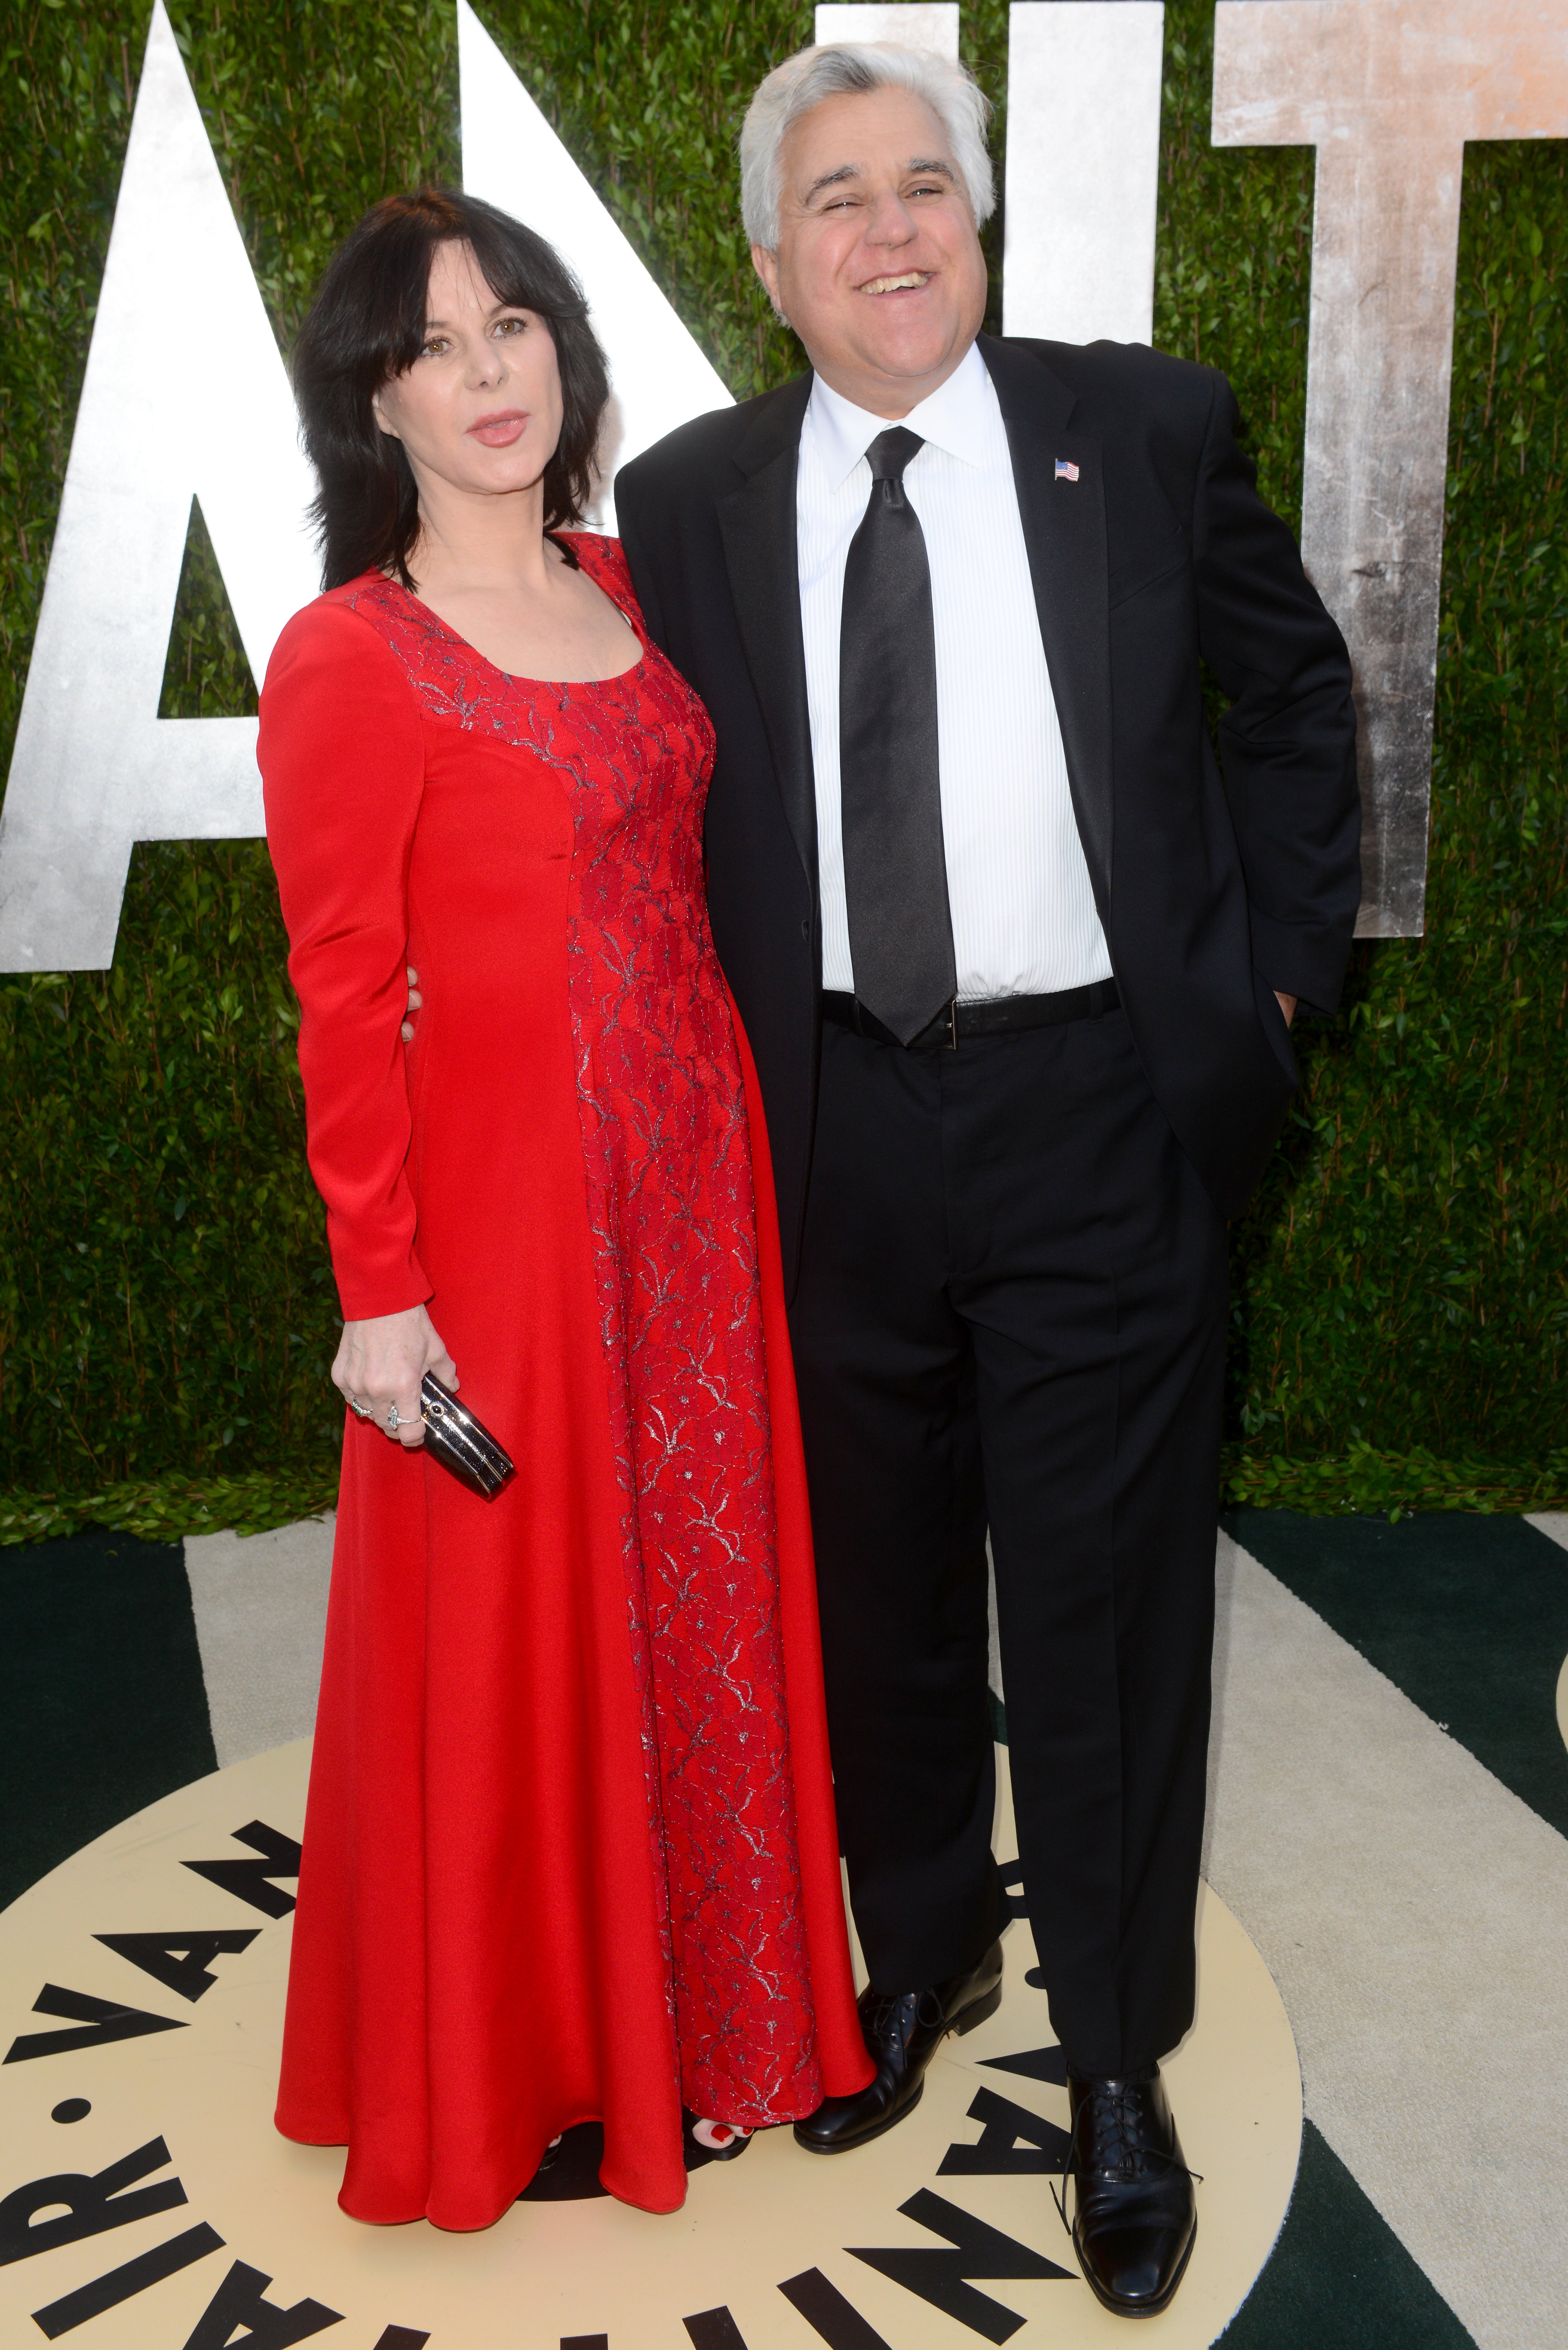 Mavis Leno and Jay Leno at Vanity Fair's 19th annual Oscars party | Source: Getty Images